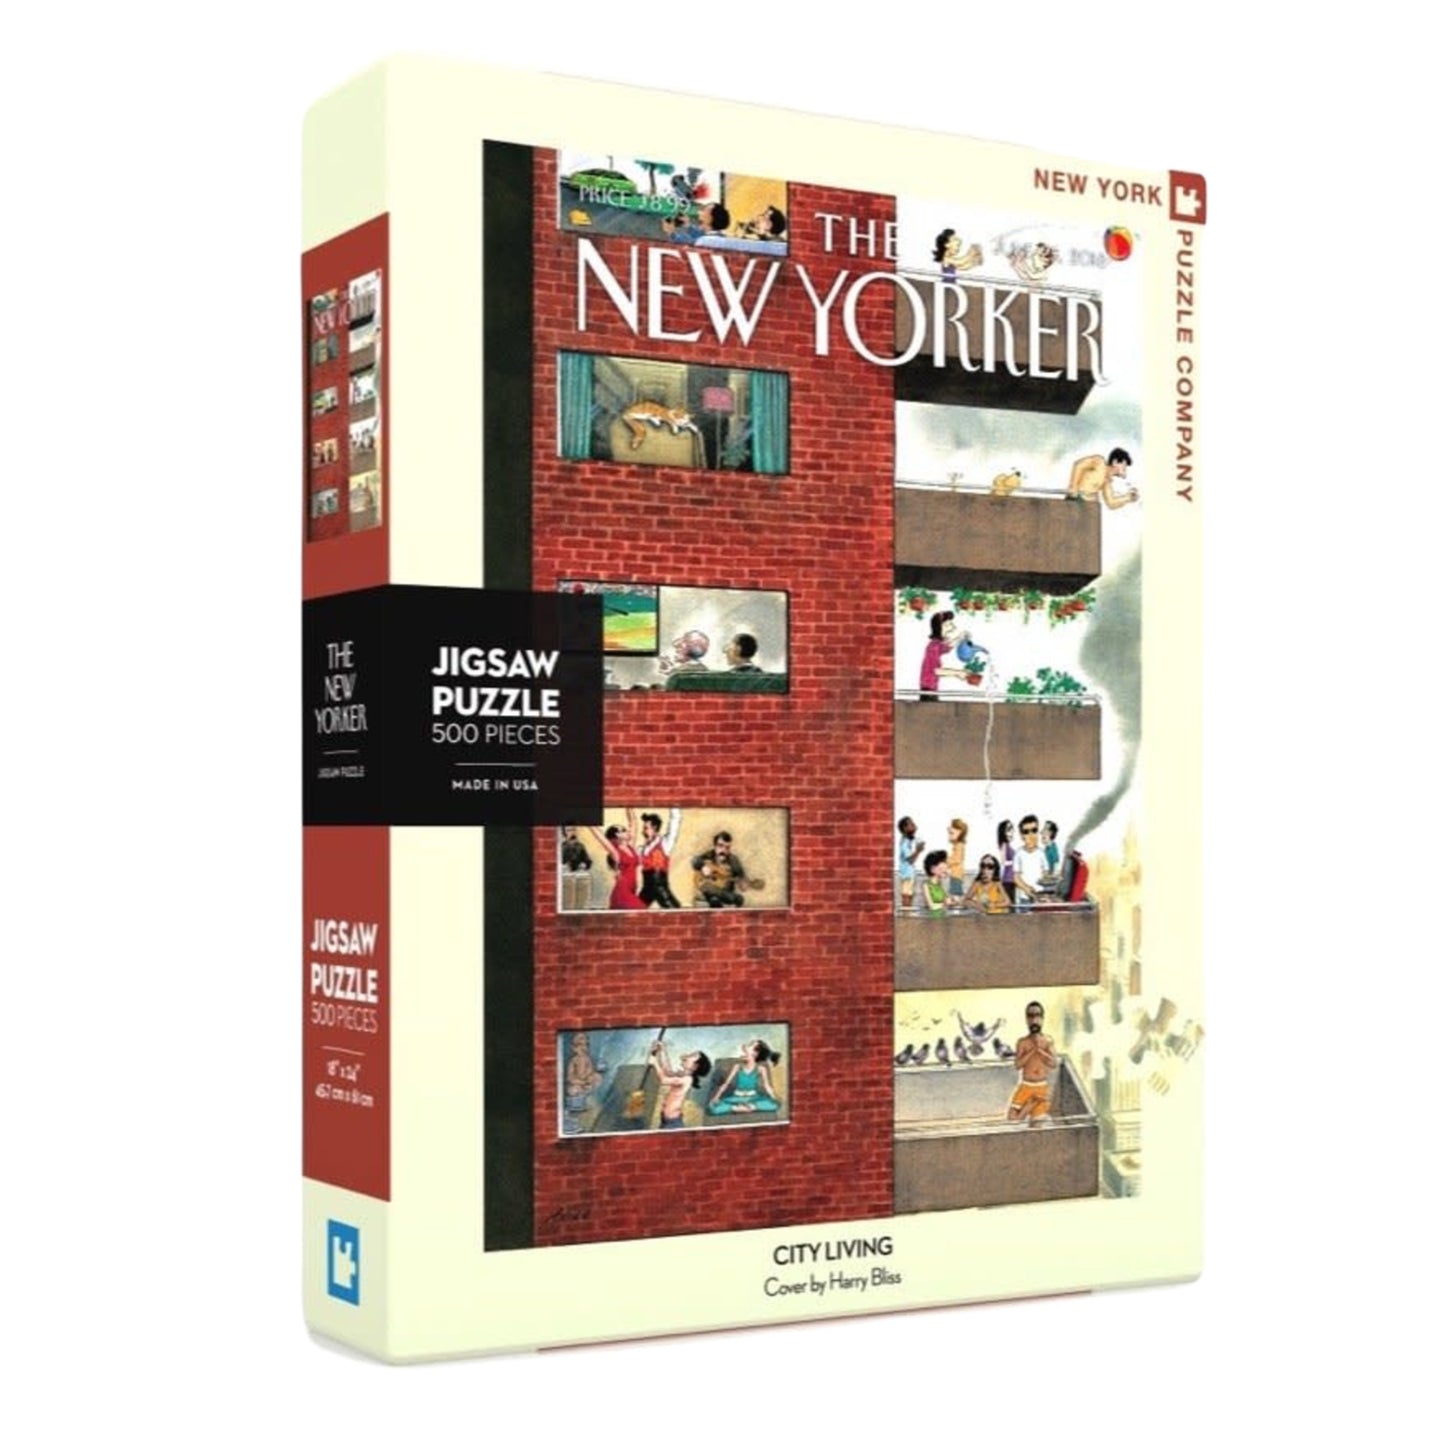 The New Yorker, City Living Puzzle